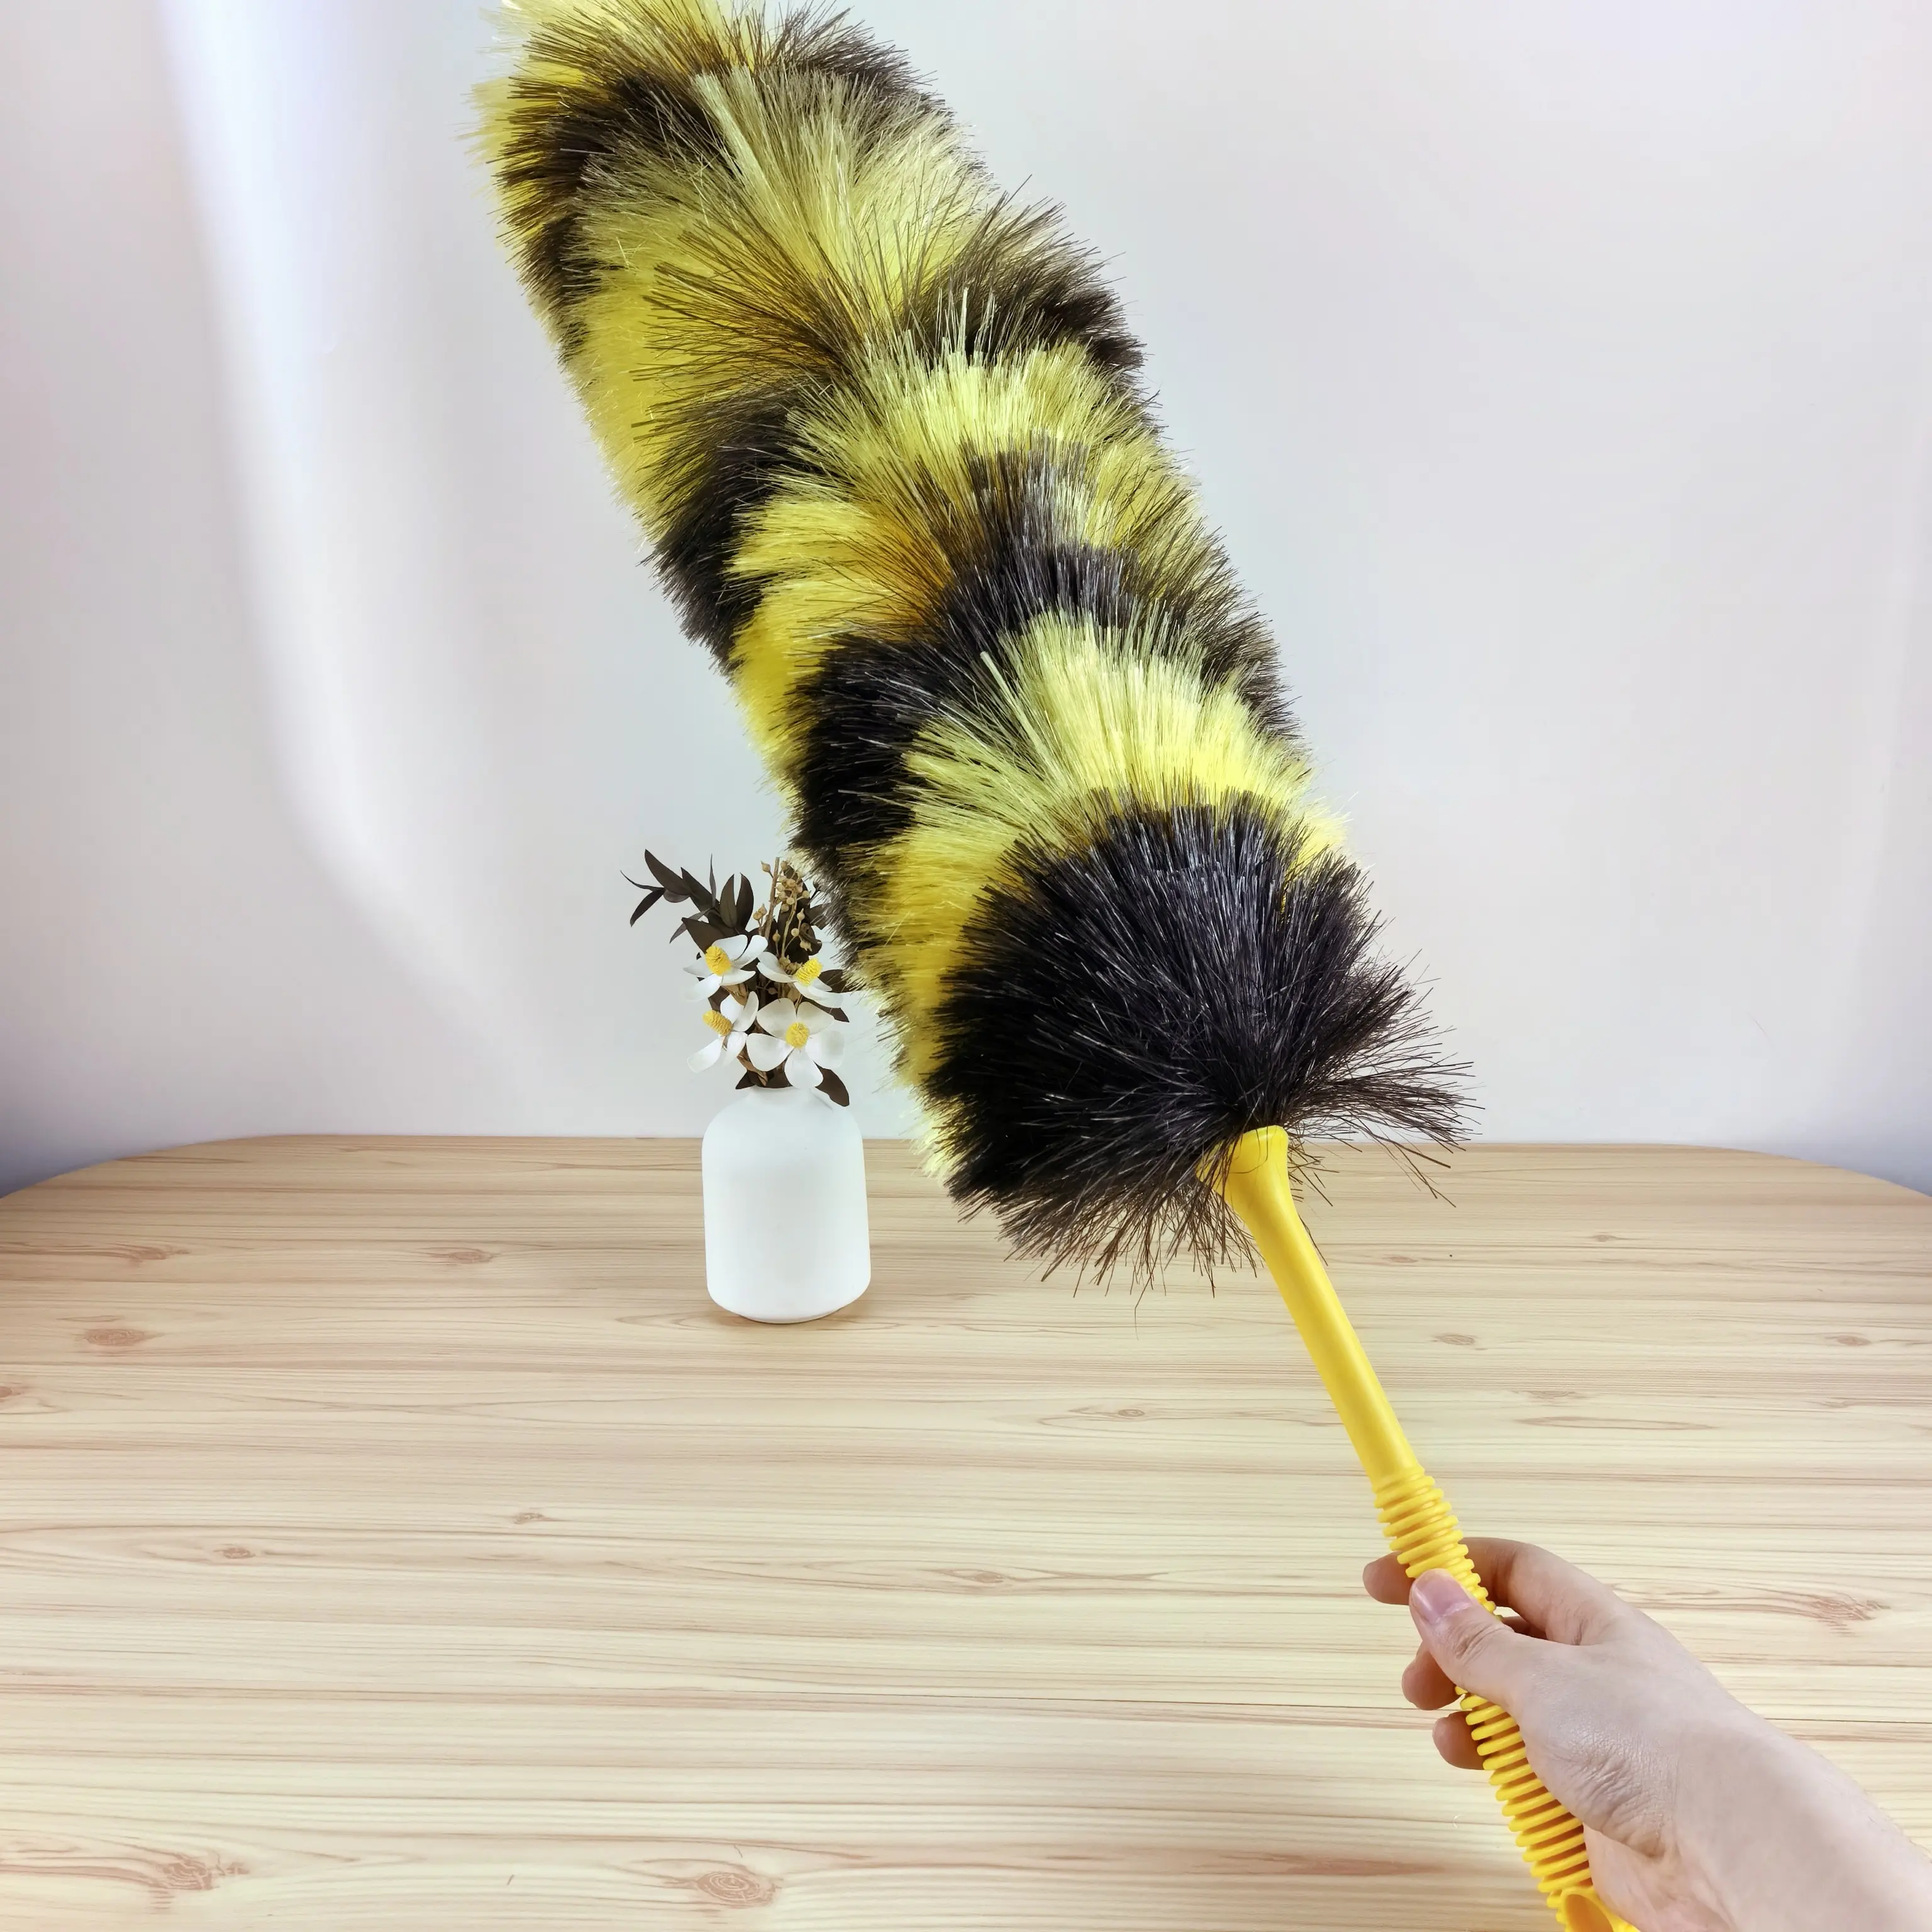 76CM Microfiber Duster 120g Feather Duster Flexible with Plastic Rubber Handle for Household Cleaning